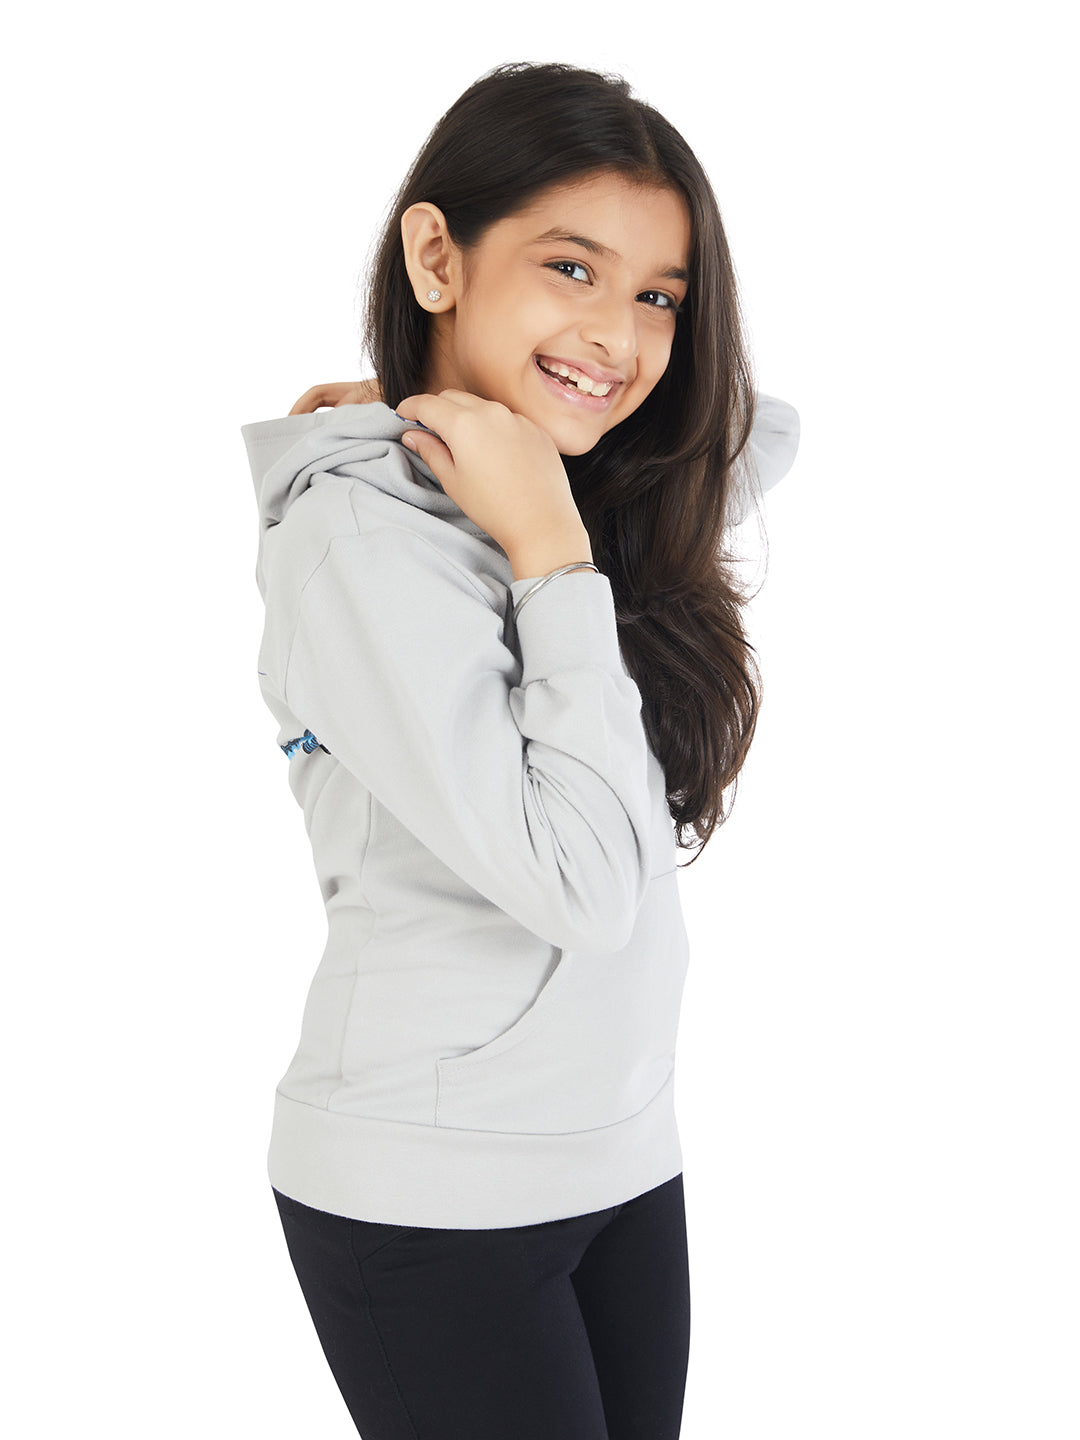 Olele® Girls French Terry Hoodie - Grey with Shark Print on Back